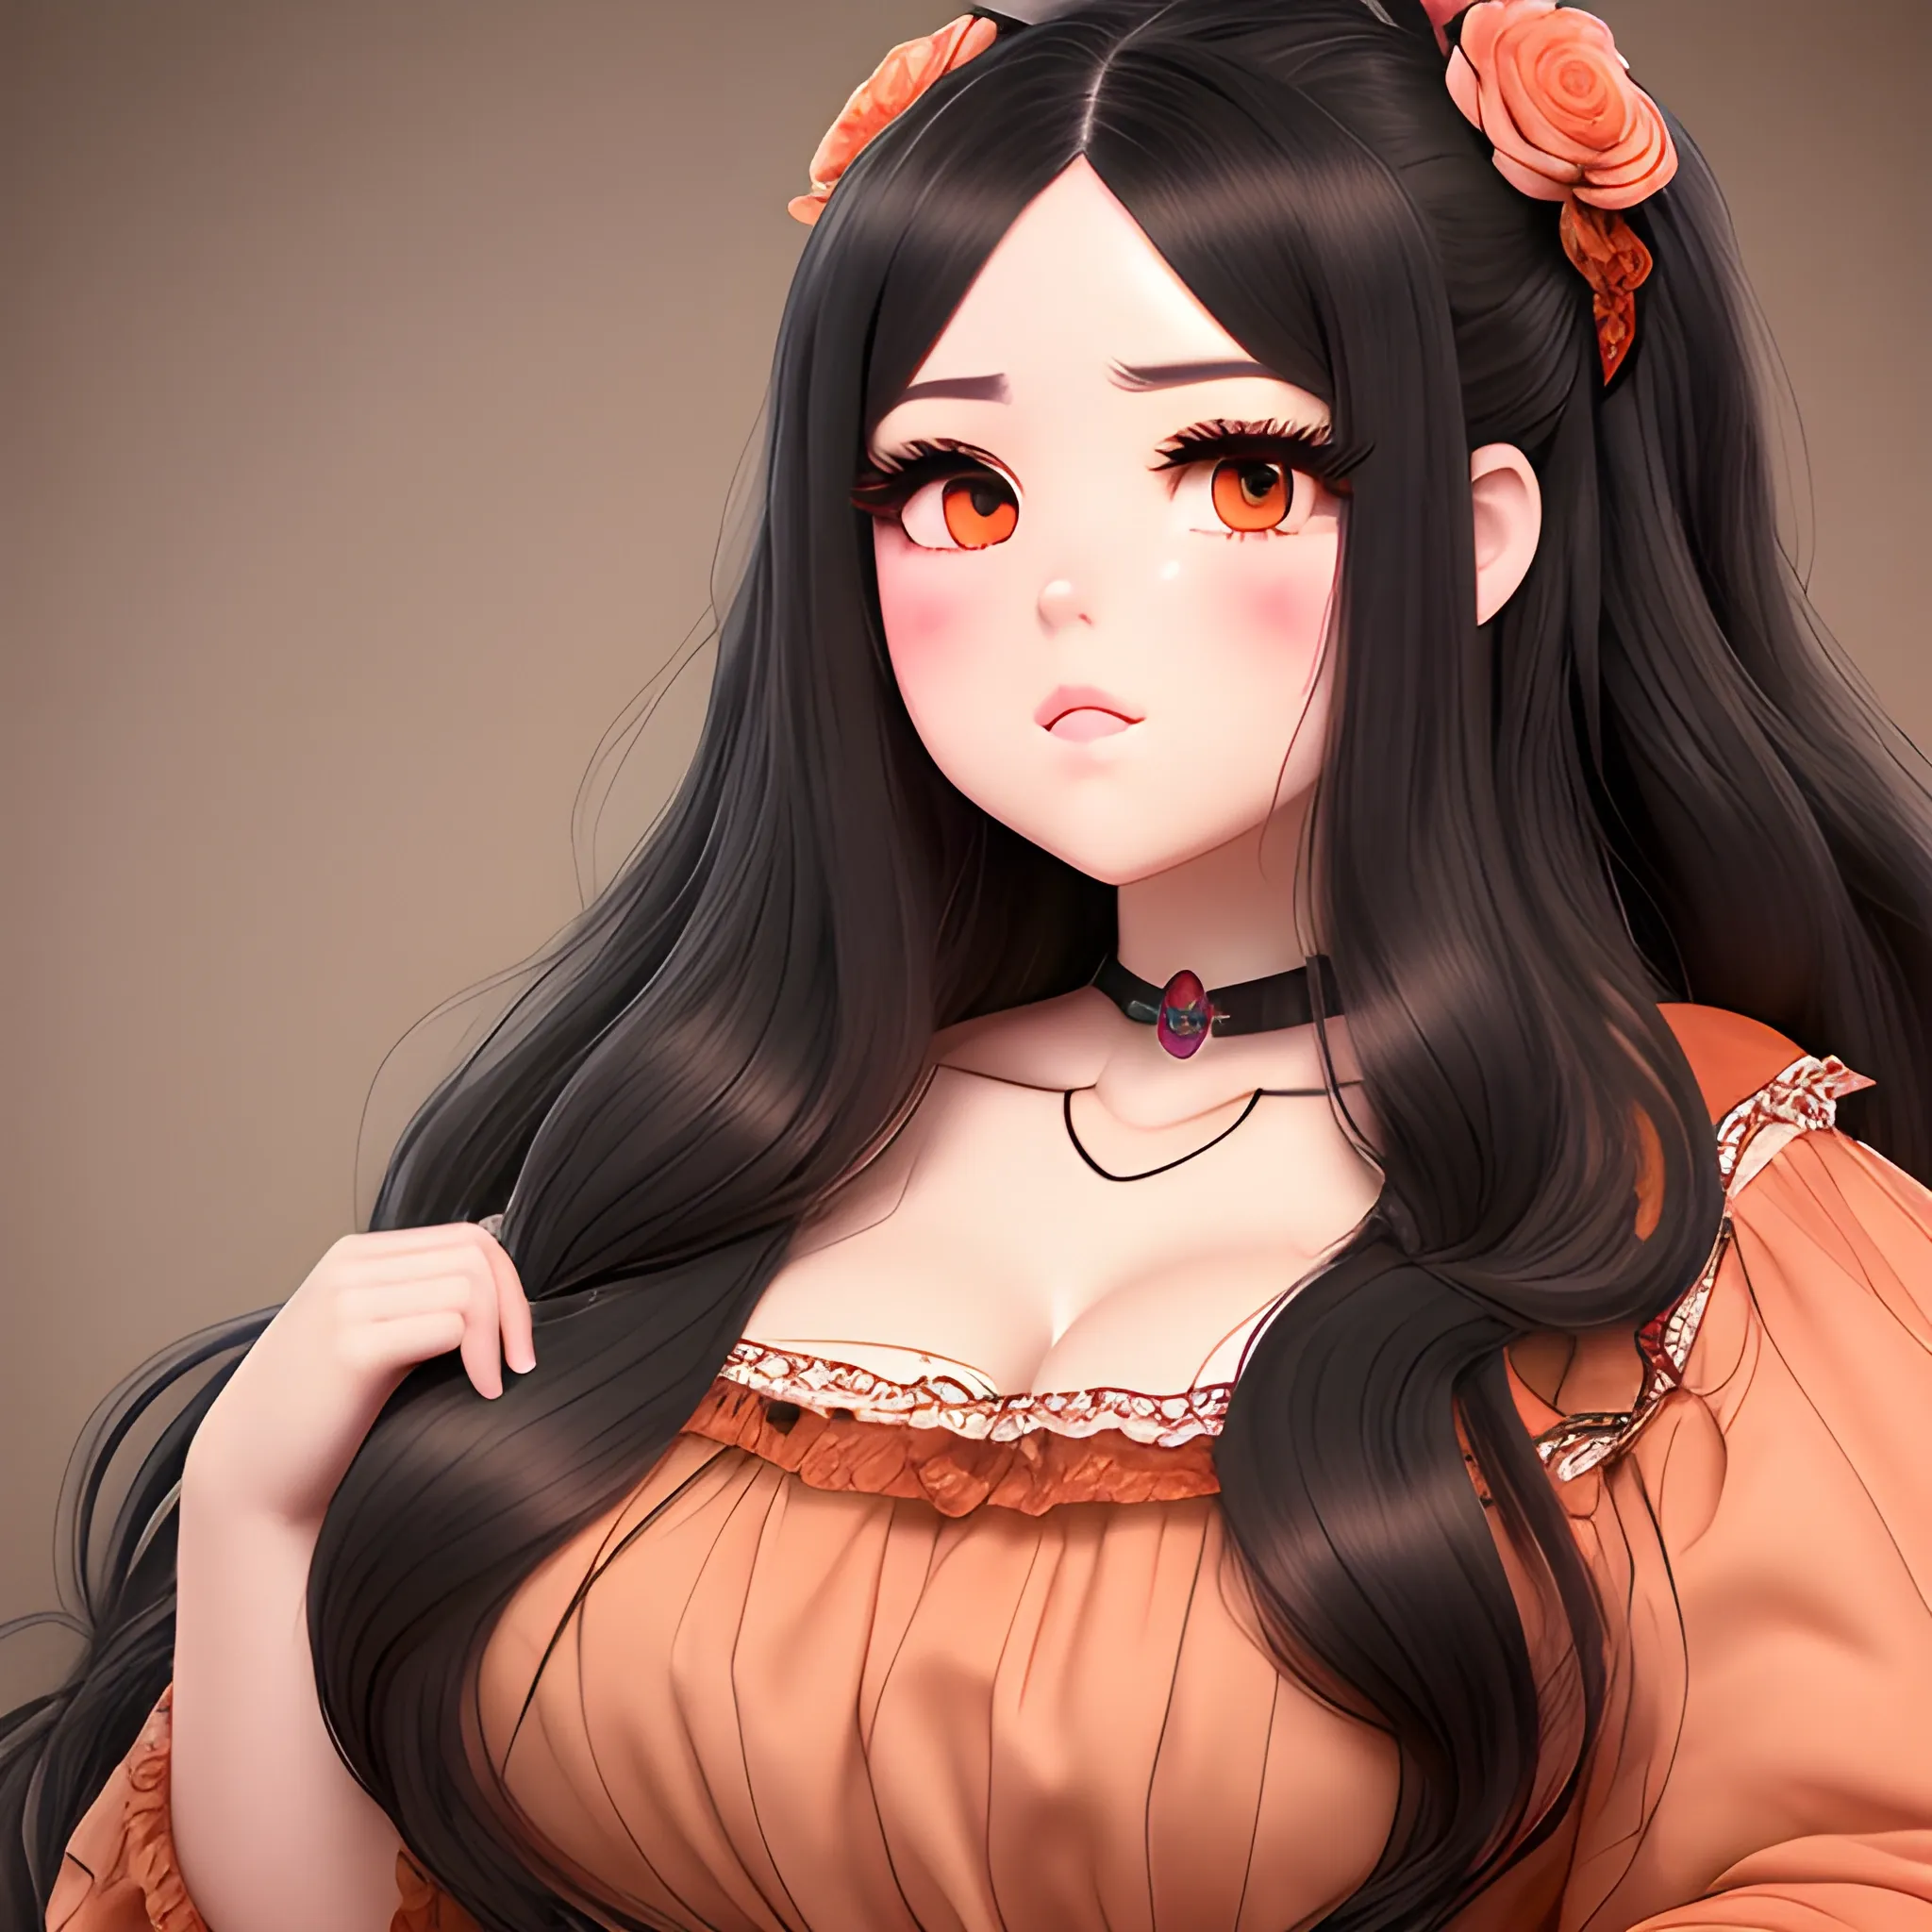 (((high detail))), best quality, Warm Colors, (detailed), (high resolution)Black long-haired female adult, full body, curvy face, with rosy cheeks, big black eyes, thick eyelashes, thick peach lips, thick eyebrows,  with a black and red dress  Yo quiero el harem 